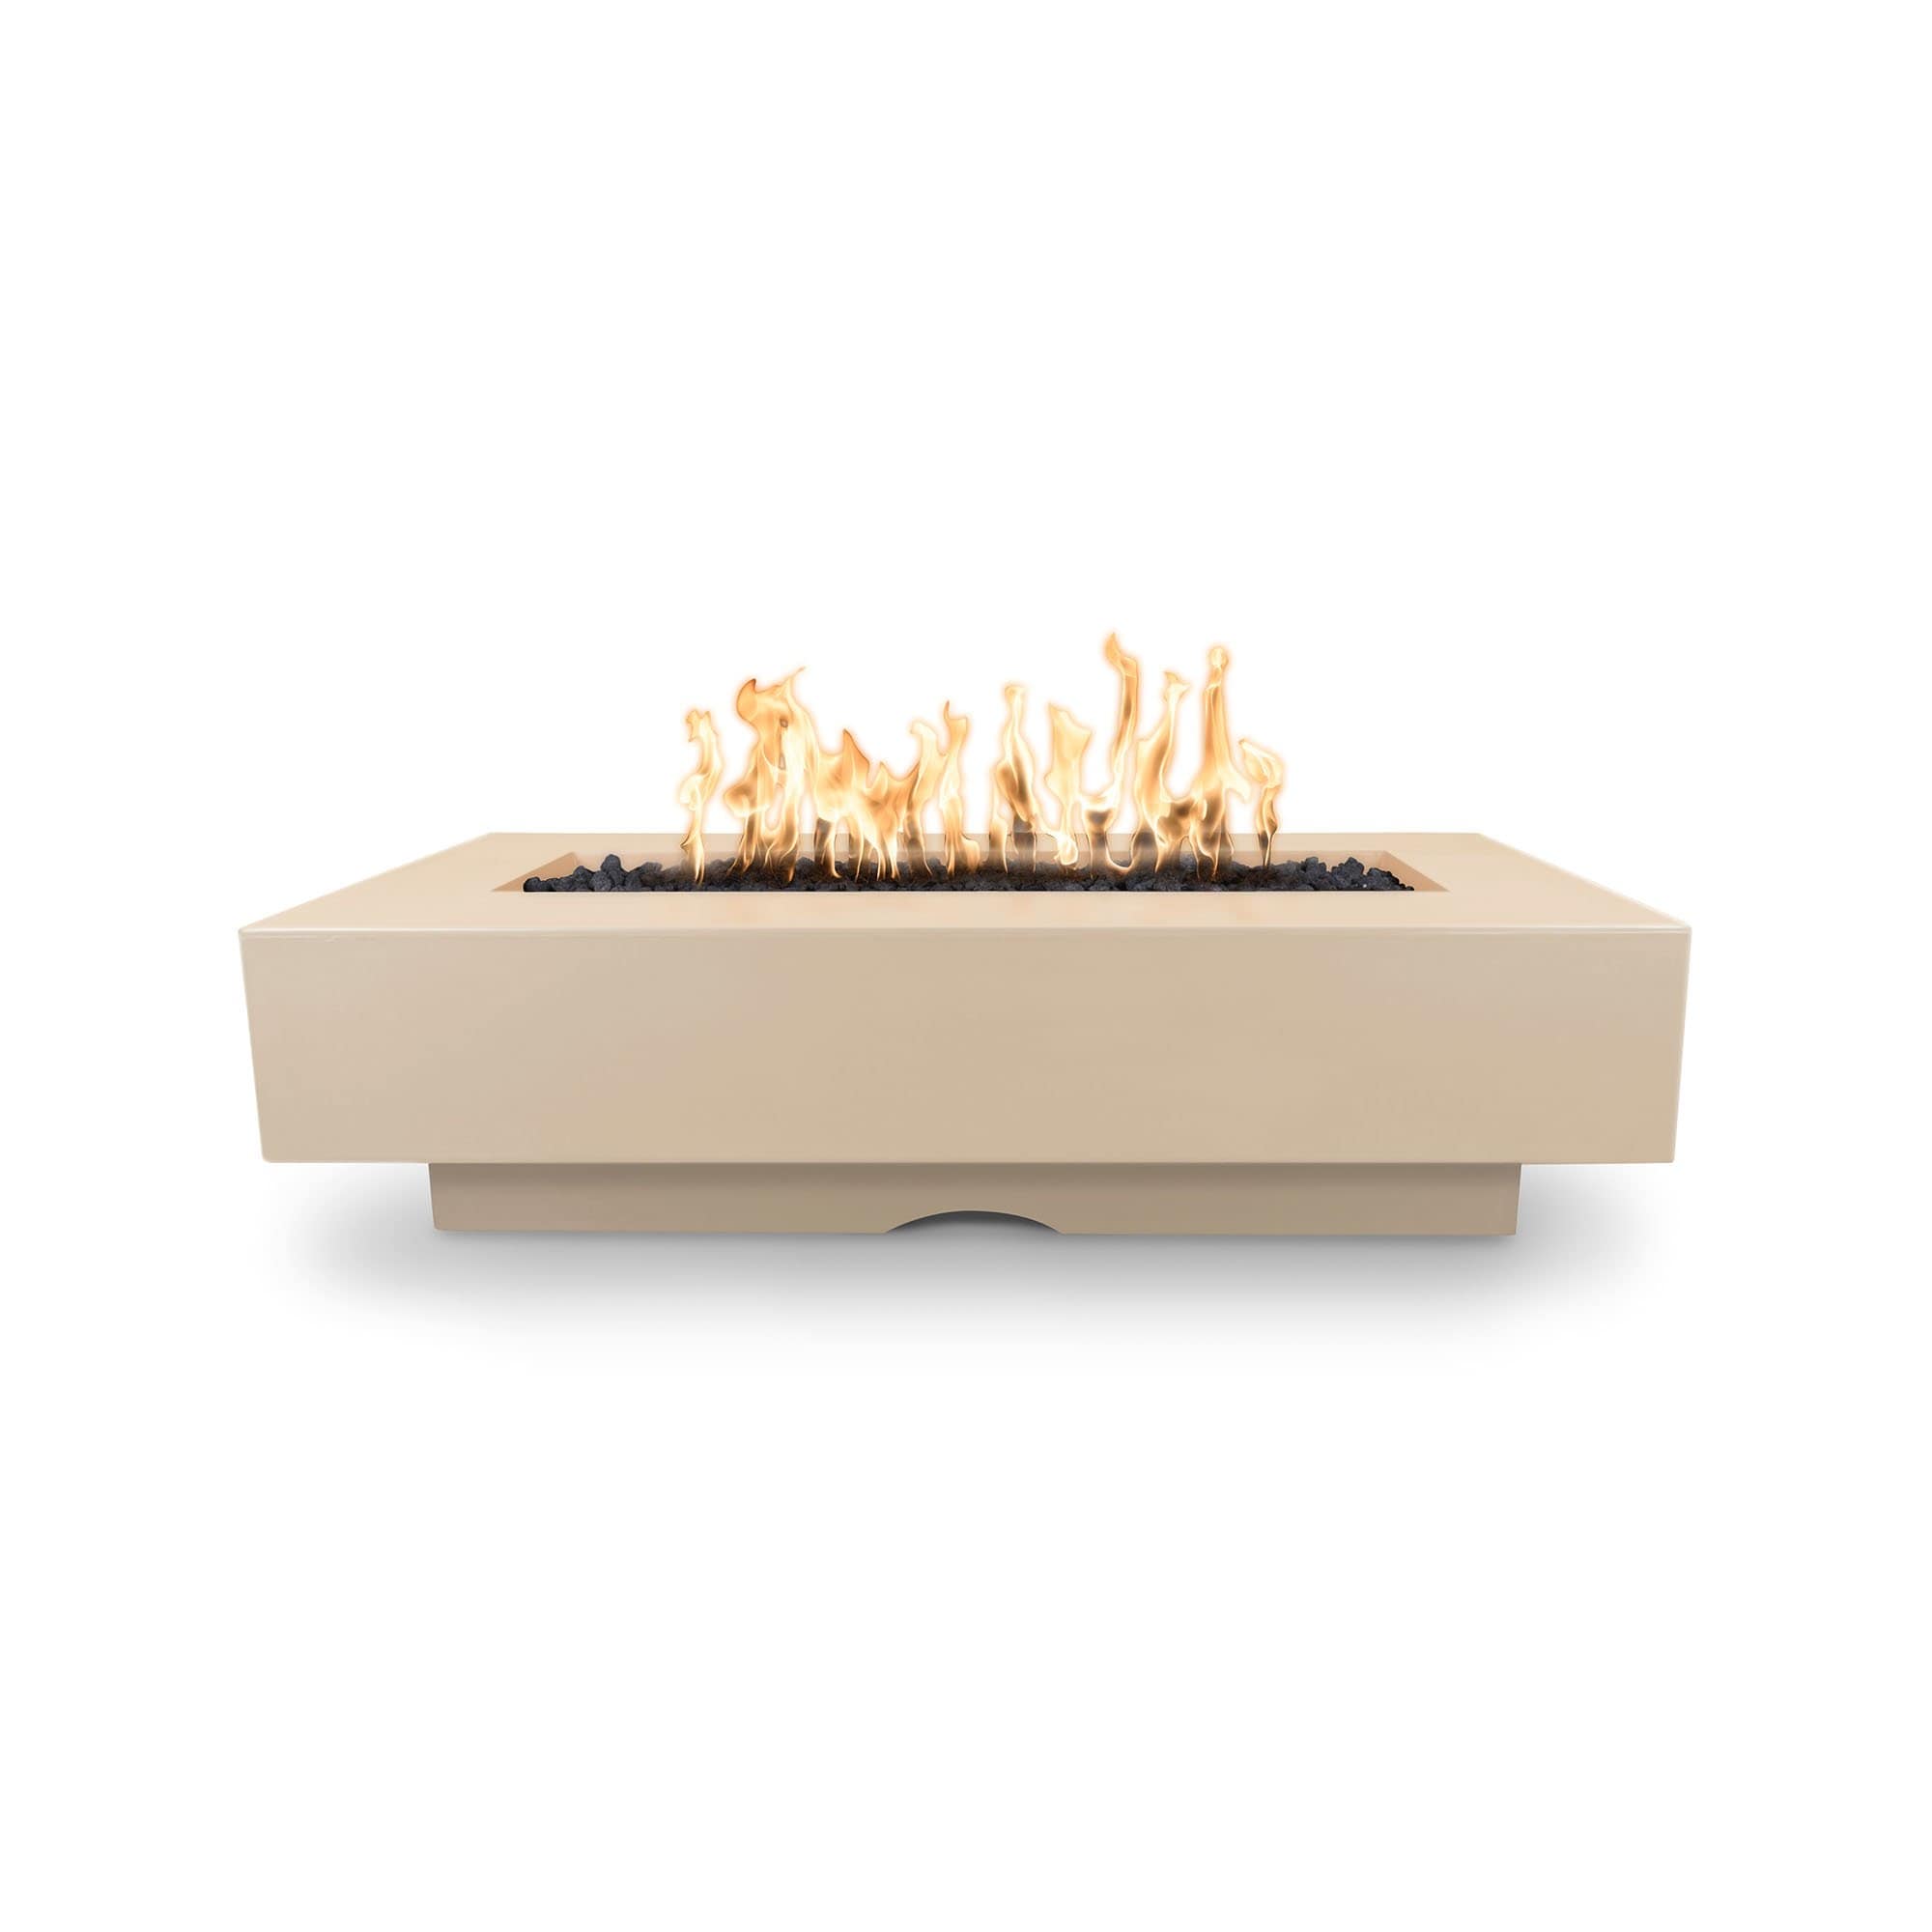 The Outdoor Plus Del Mar Concrete Fire Pit in Vanilla color with flame on a white background